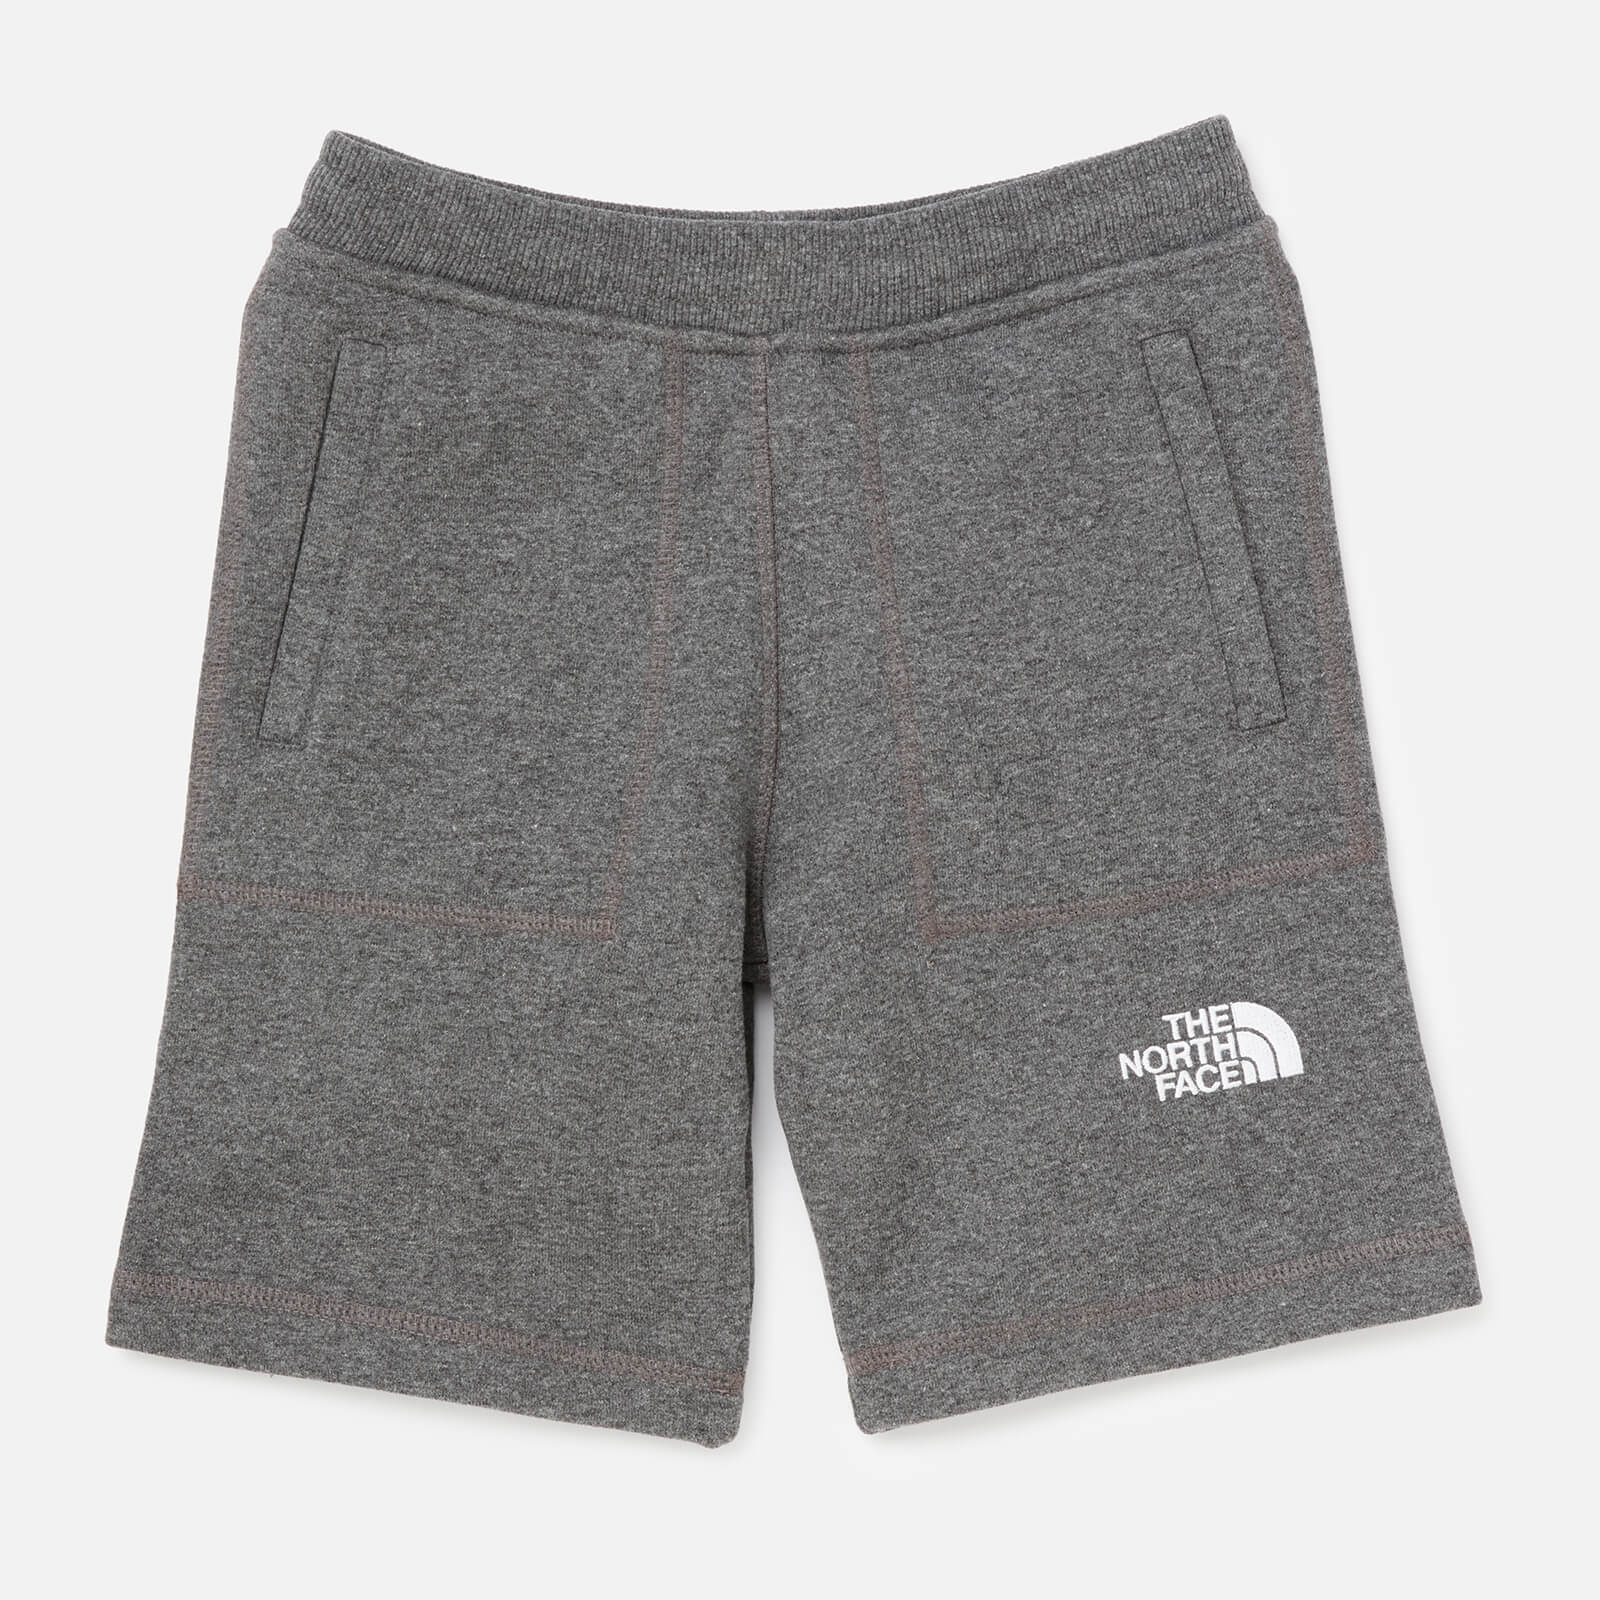 The North Face Boys' Youth Fleece Shorts - Grey - 7-8 Years